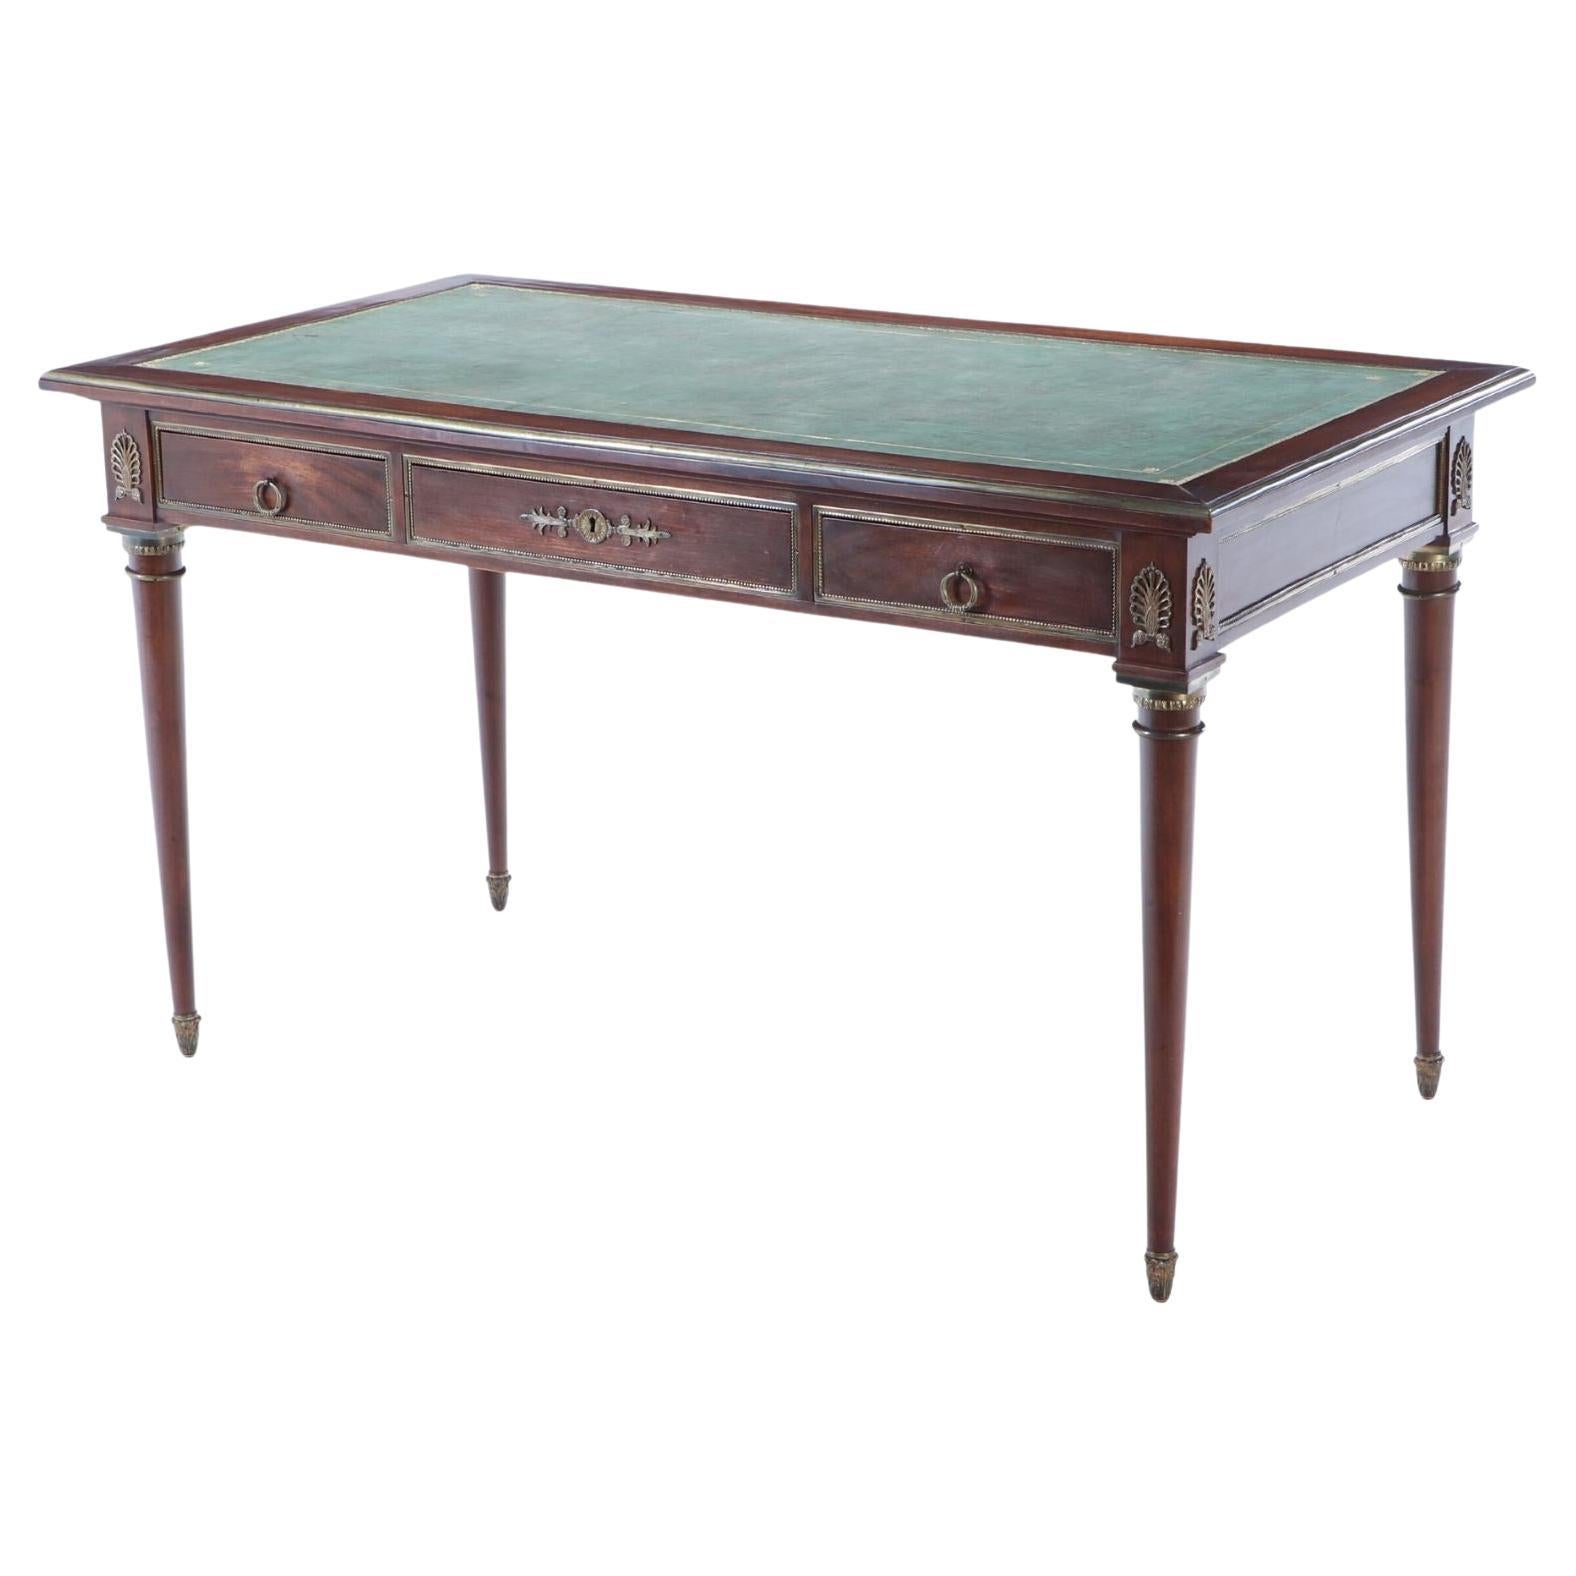 French Empire style mahogany bronze mounted writing desk, leather top circa 1940